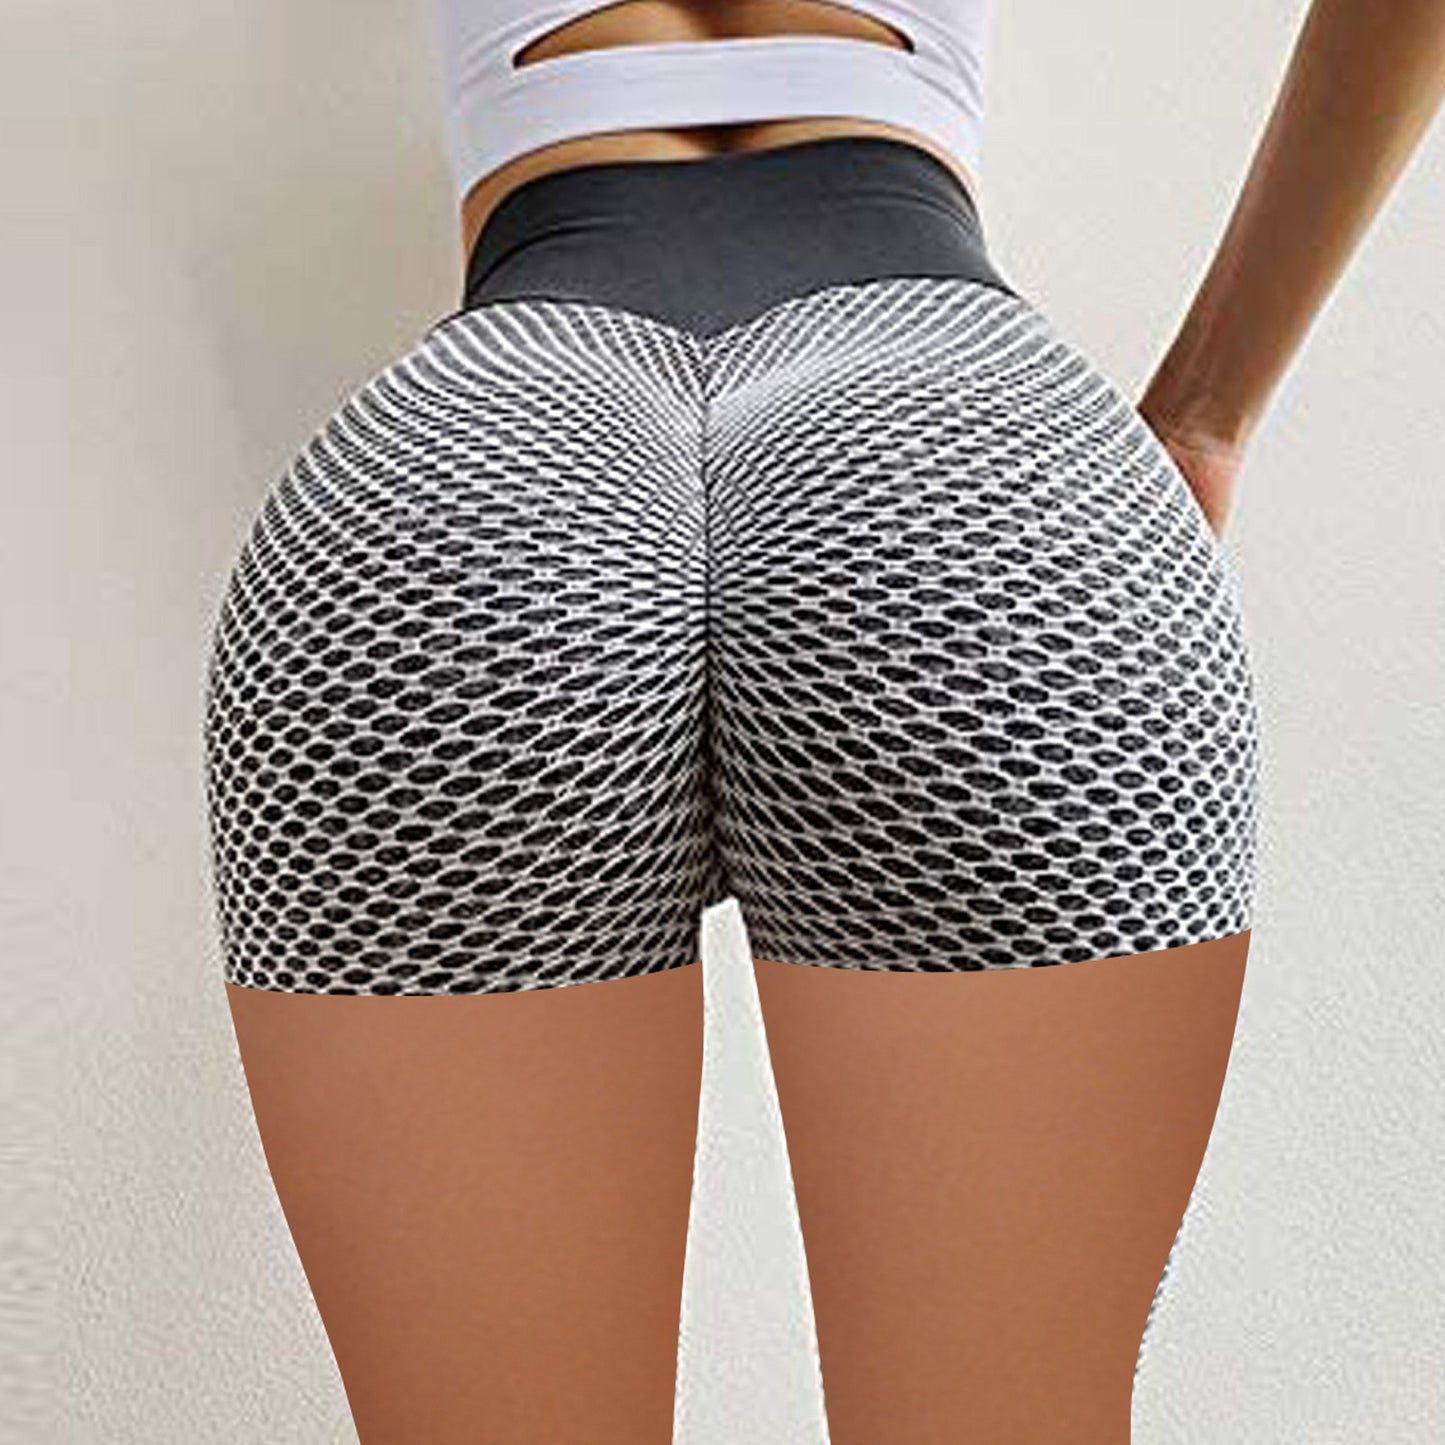 Solid Color Honeycomb Yoga Shorts for Women